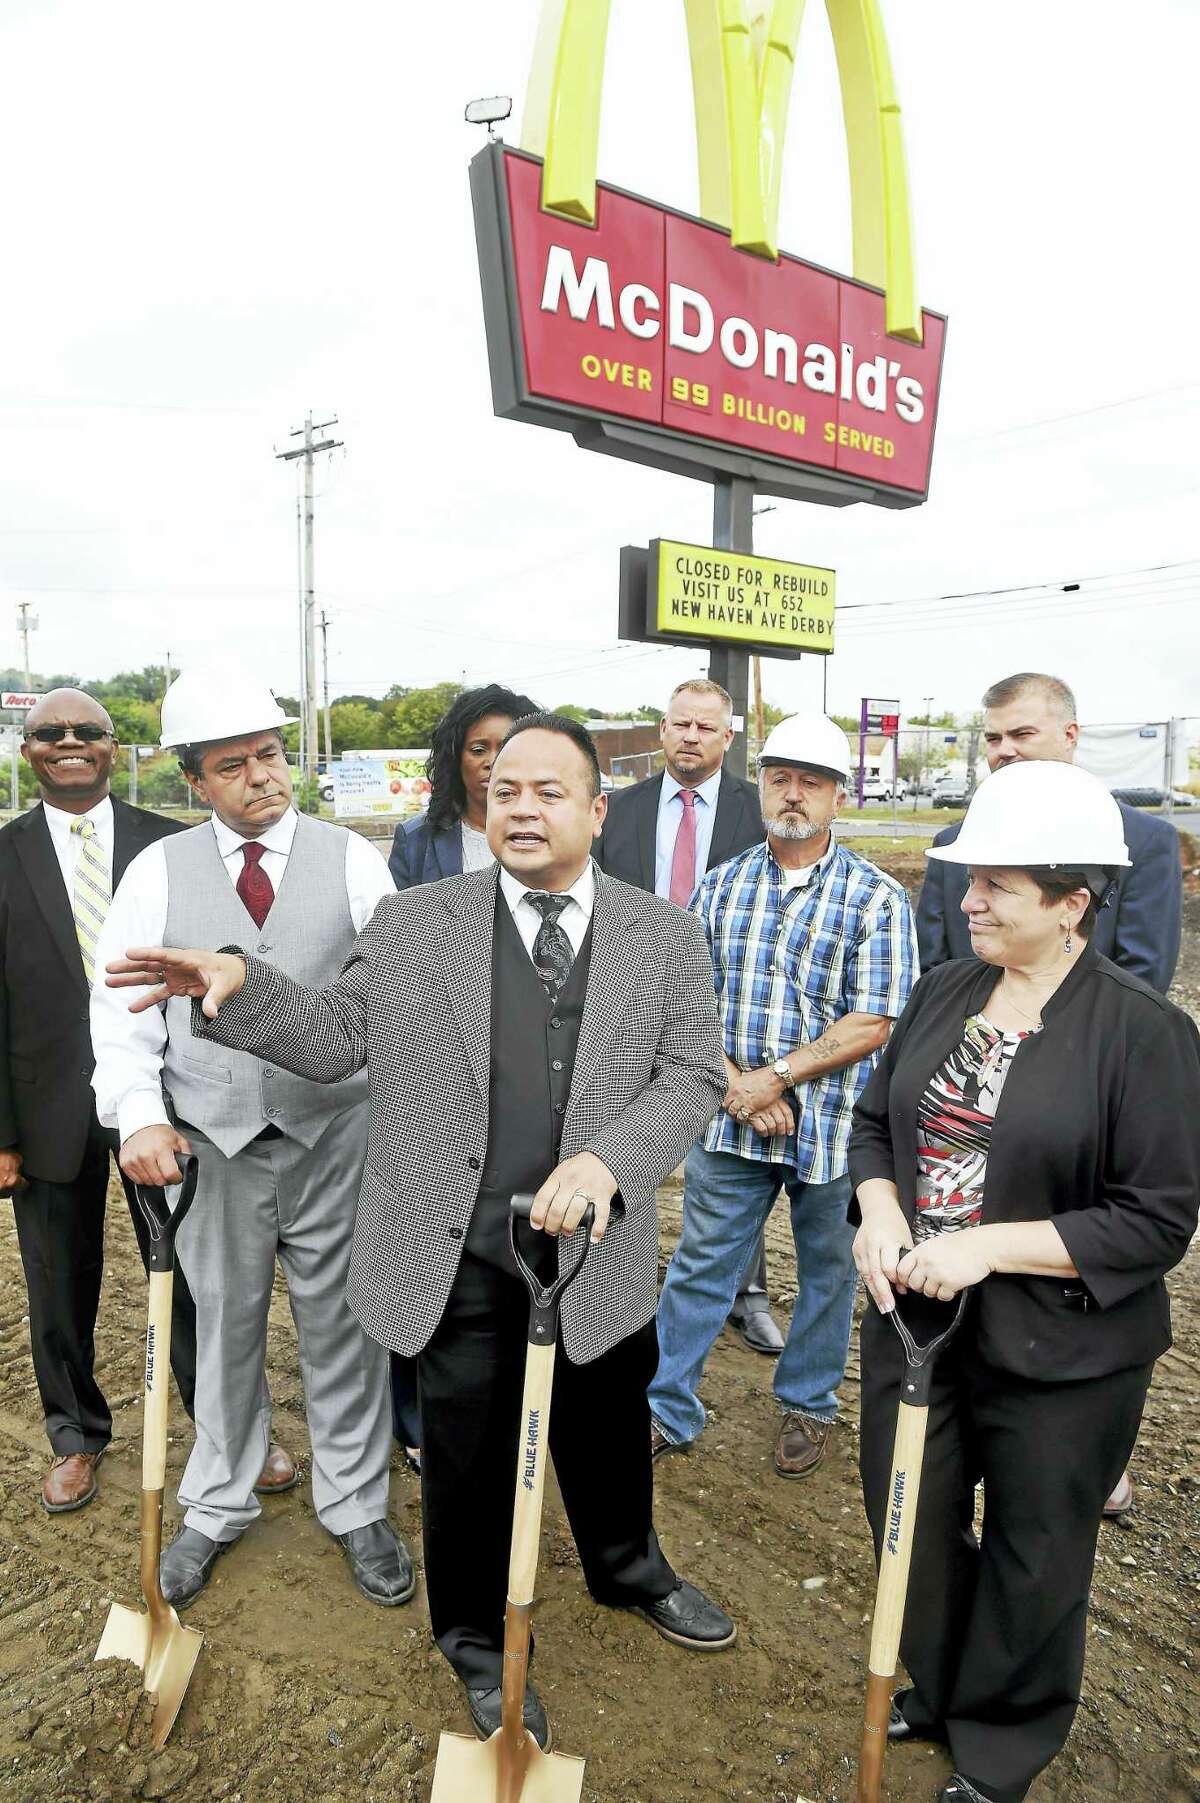 (Arnold Gold-New Haven Register) Left to right in hardhats, Ansonia Mayor David Cassetti, former Derby Mayor Anthony Staffieri and Derby Mayor Anita Dugatto listen to McDonald’s owner Joe Rodriguez (center) talk about the new modern and expanded McDonald’s being built at this location on Division St. in Derby during a groundbreaking ceremony on 9/27/2016.